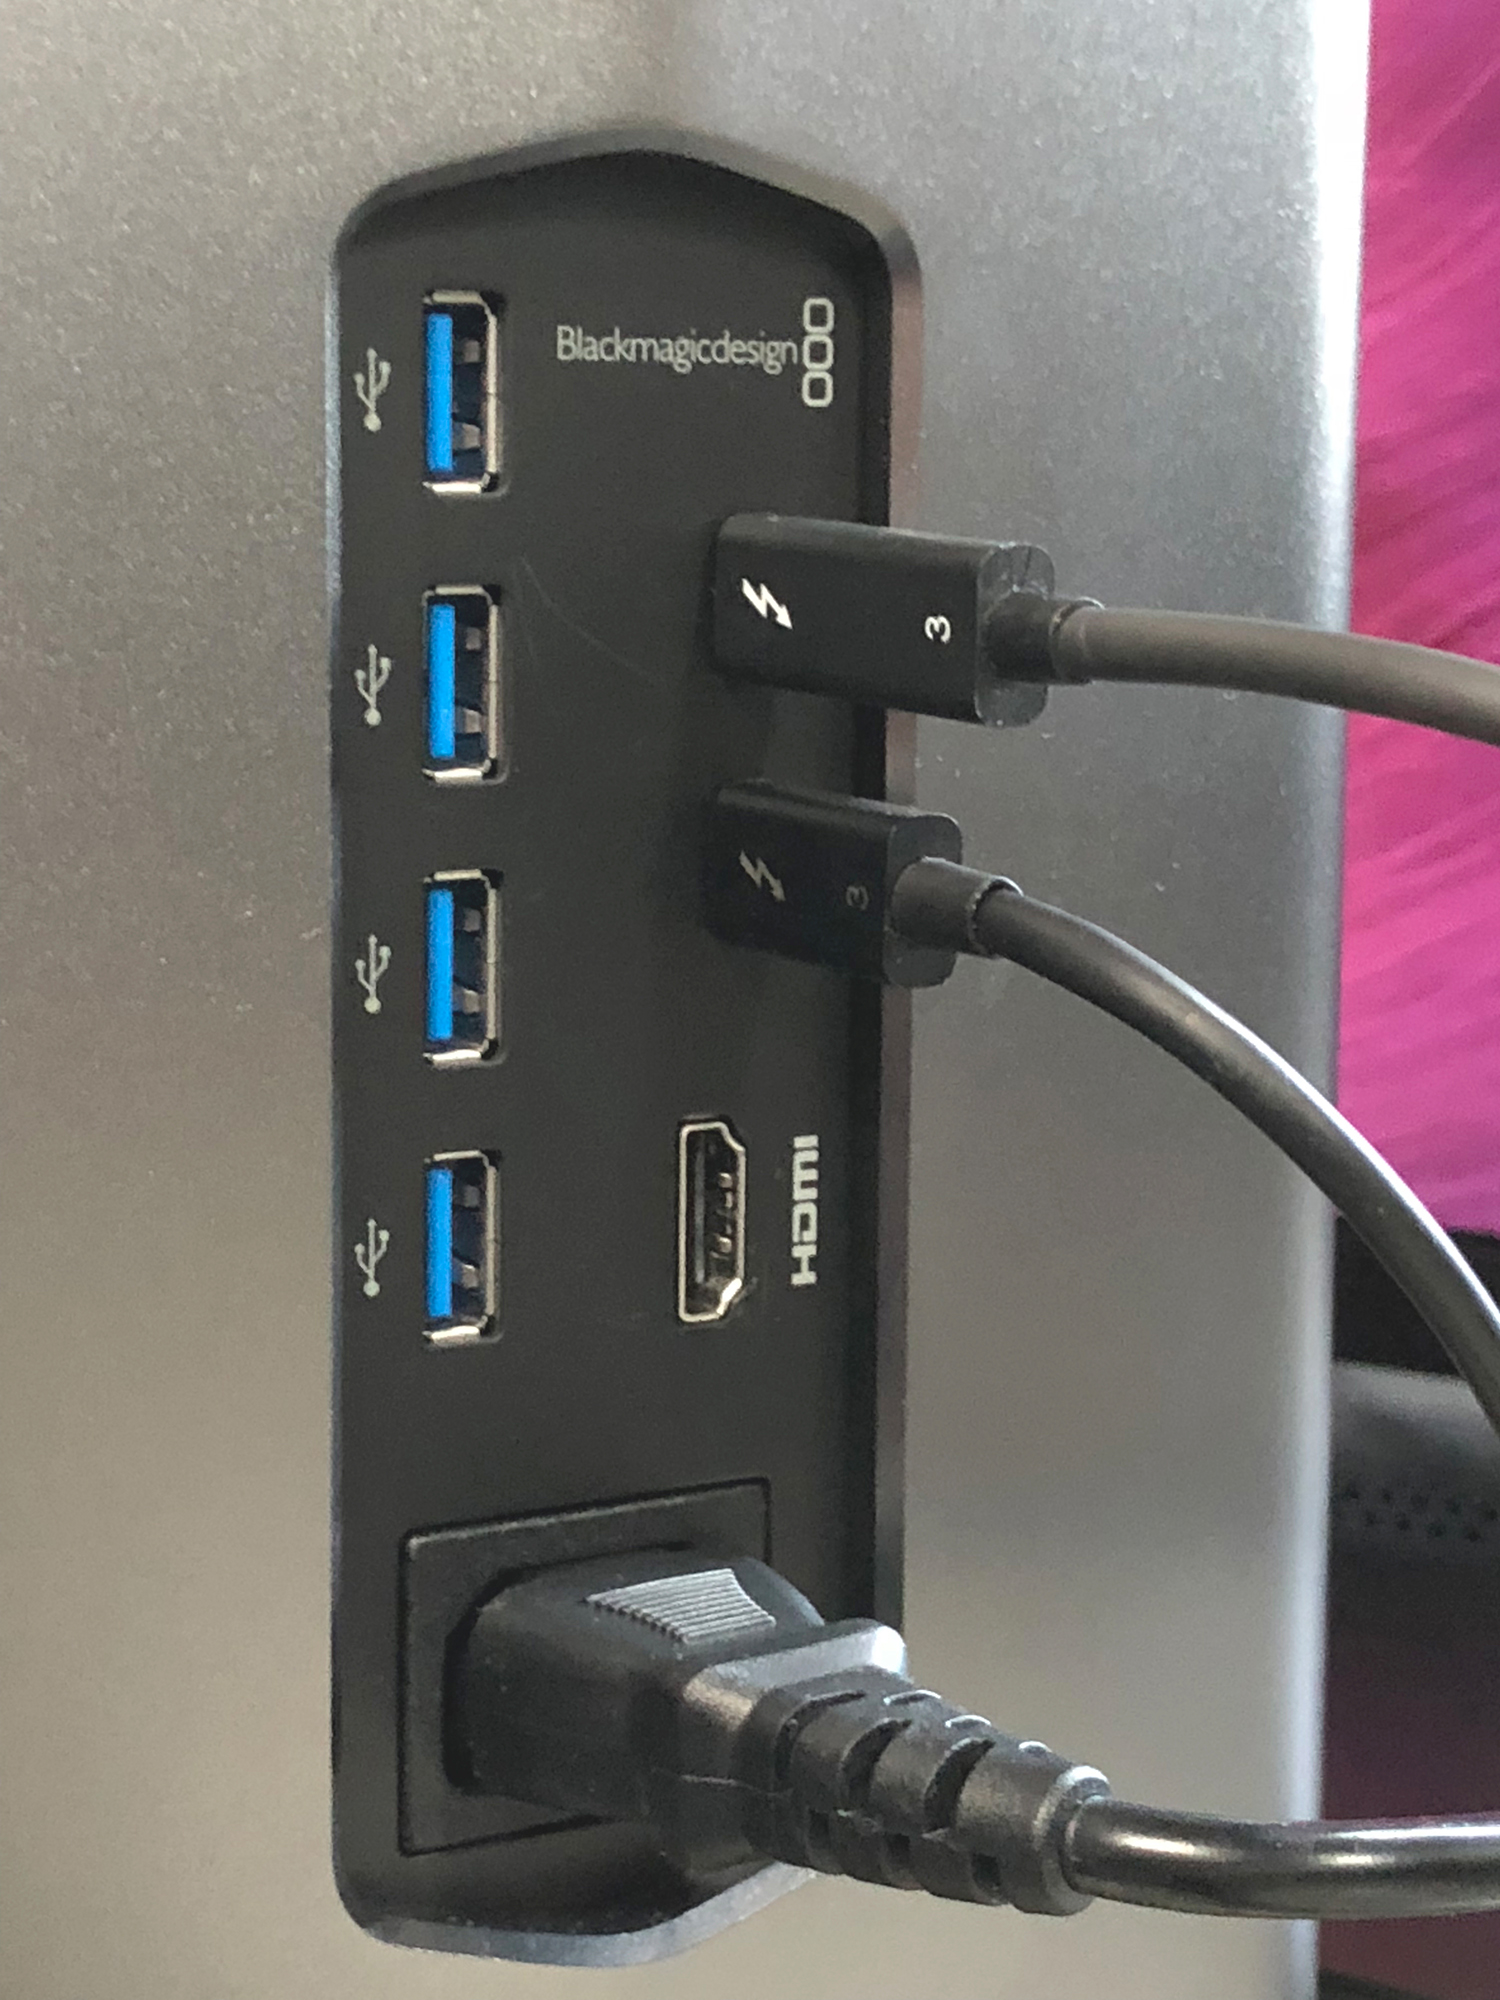 Blackmagic eGPU - What is it really going to do for me? 8